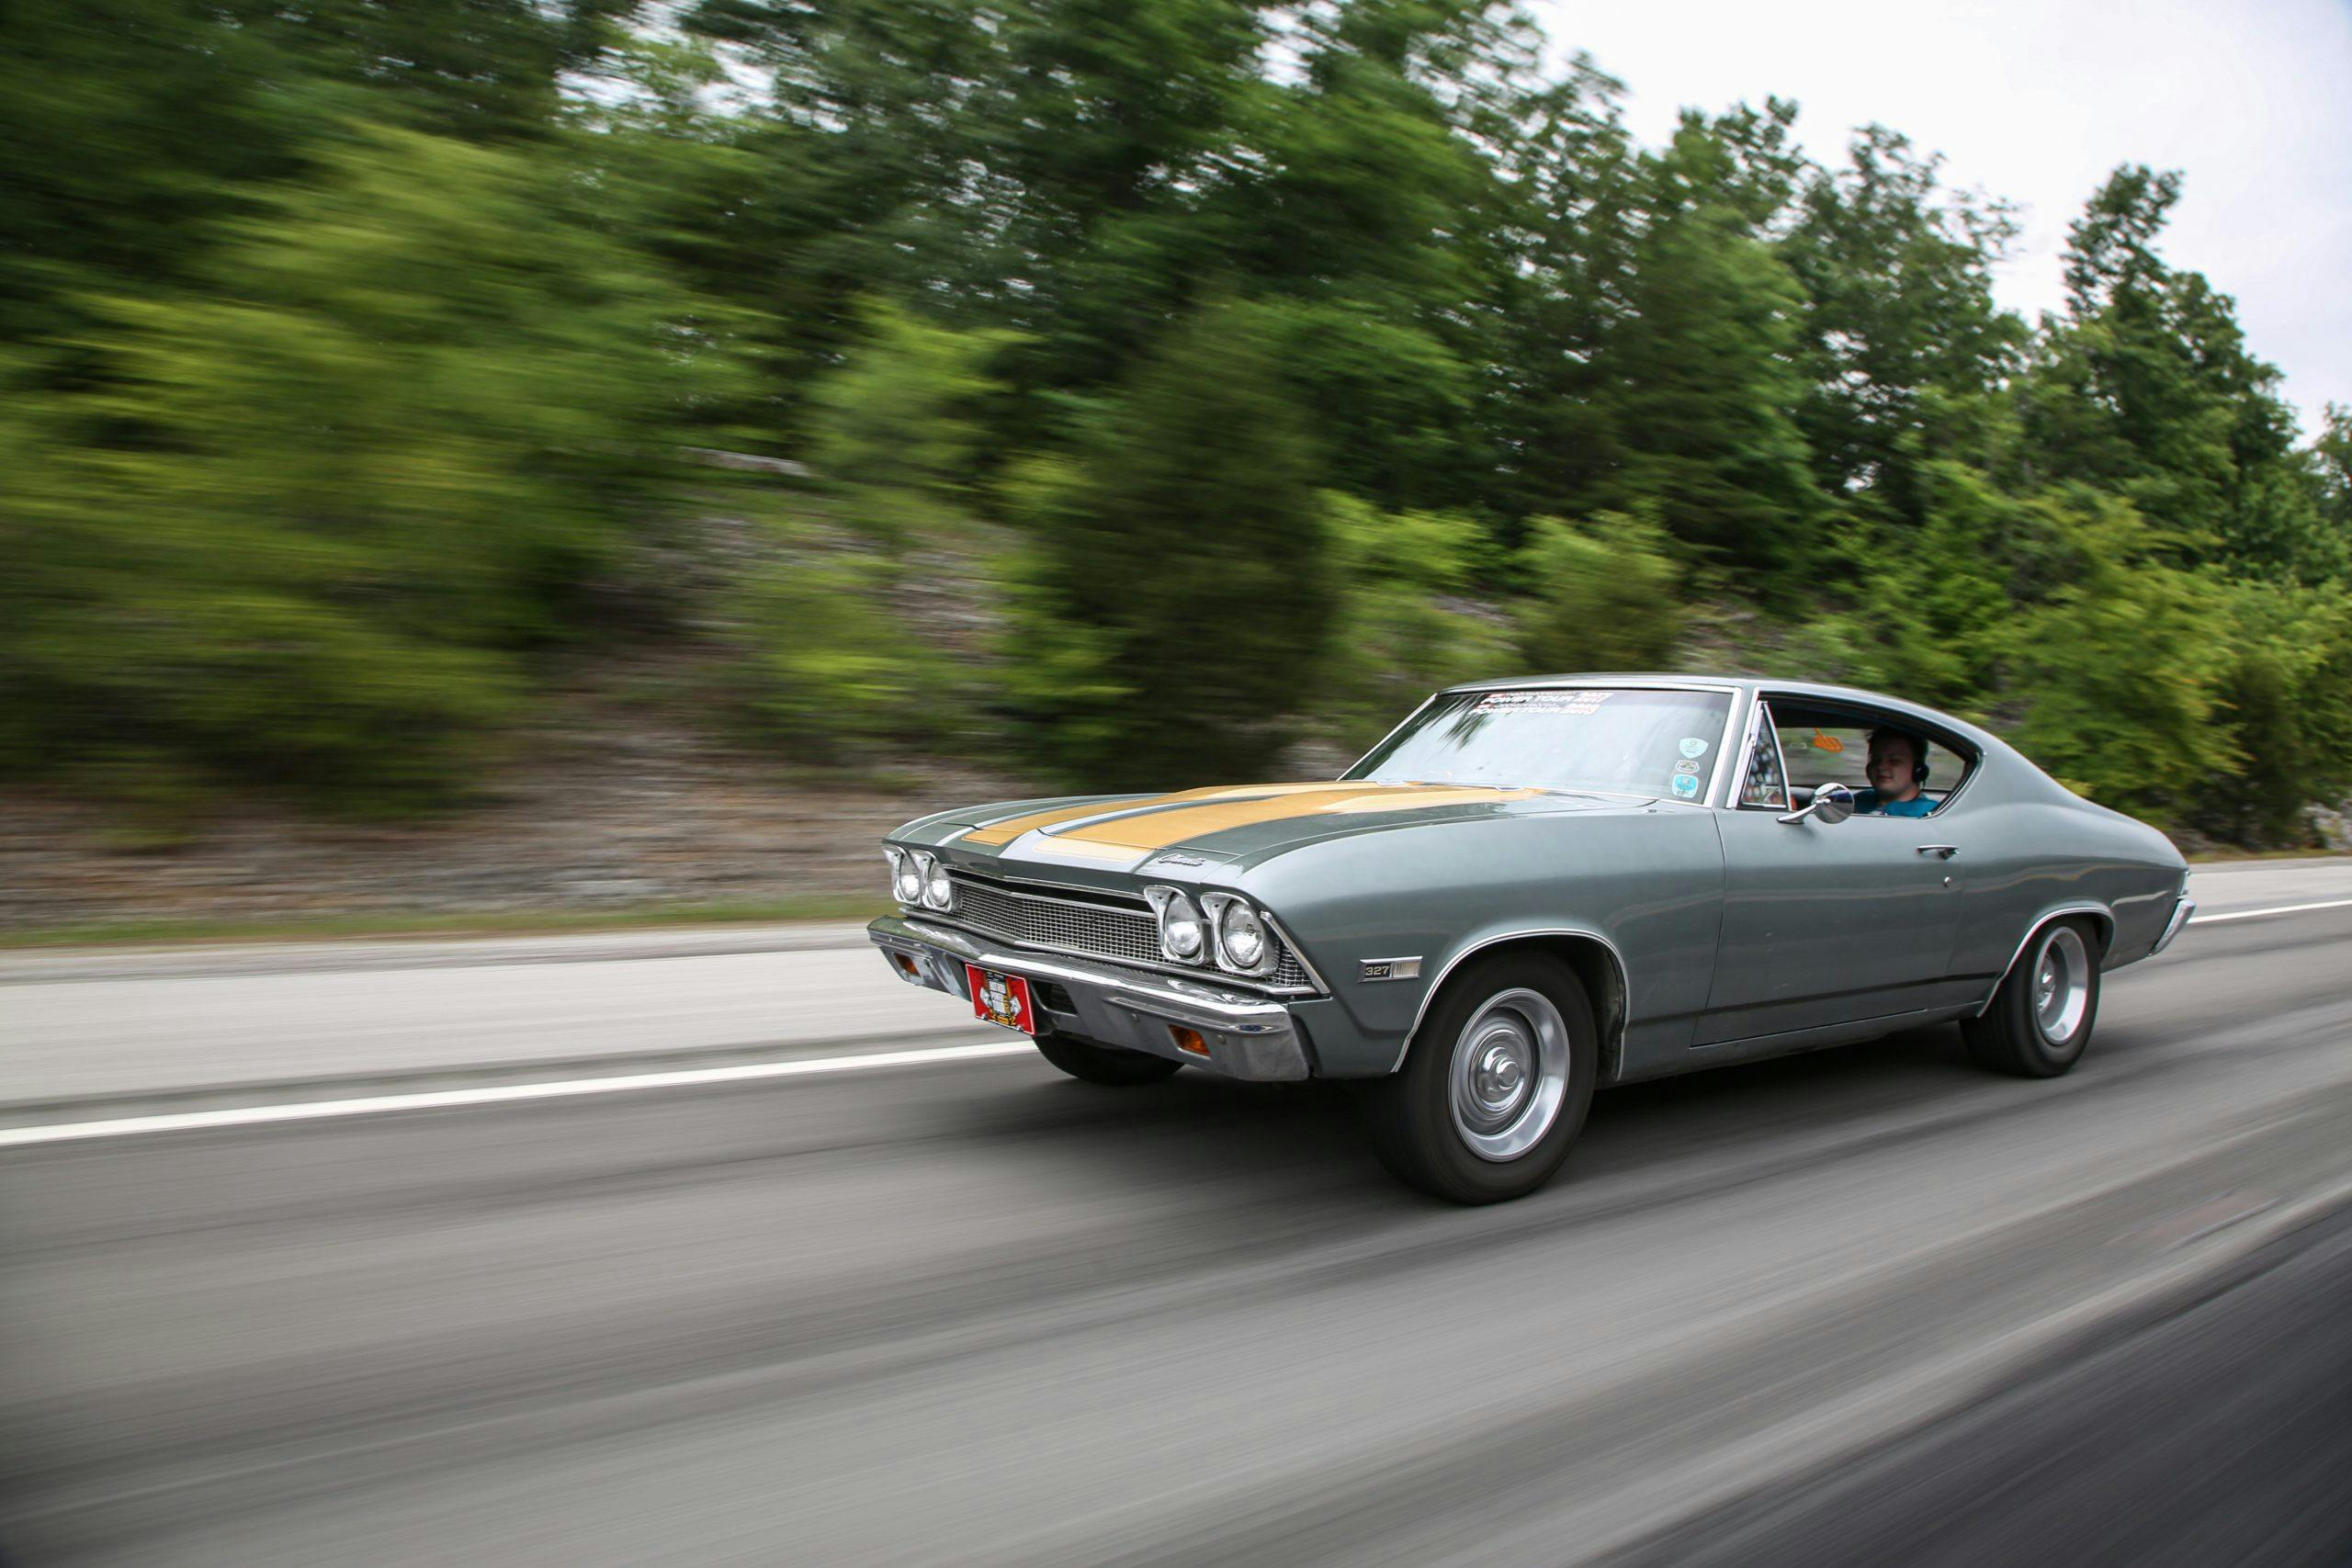 Chevelle cruises down back road